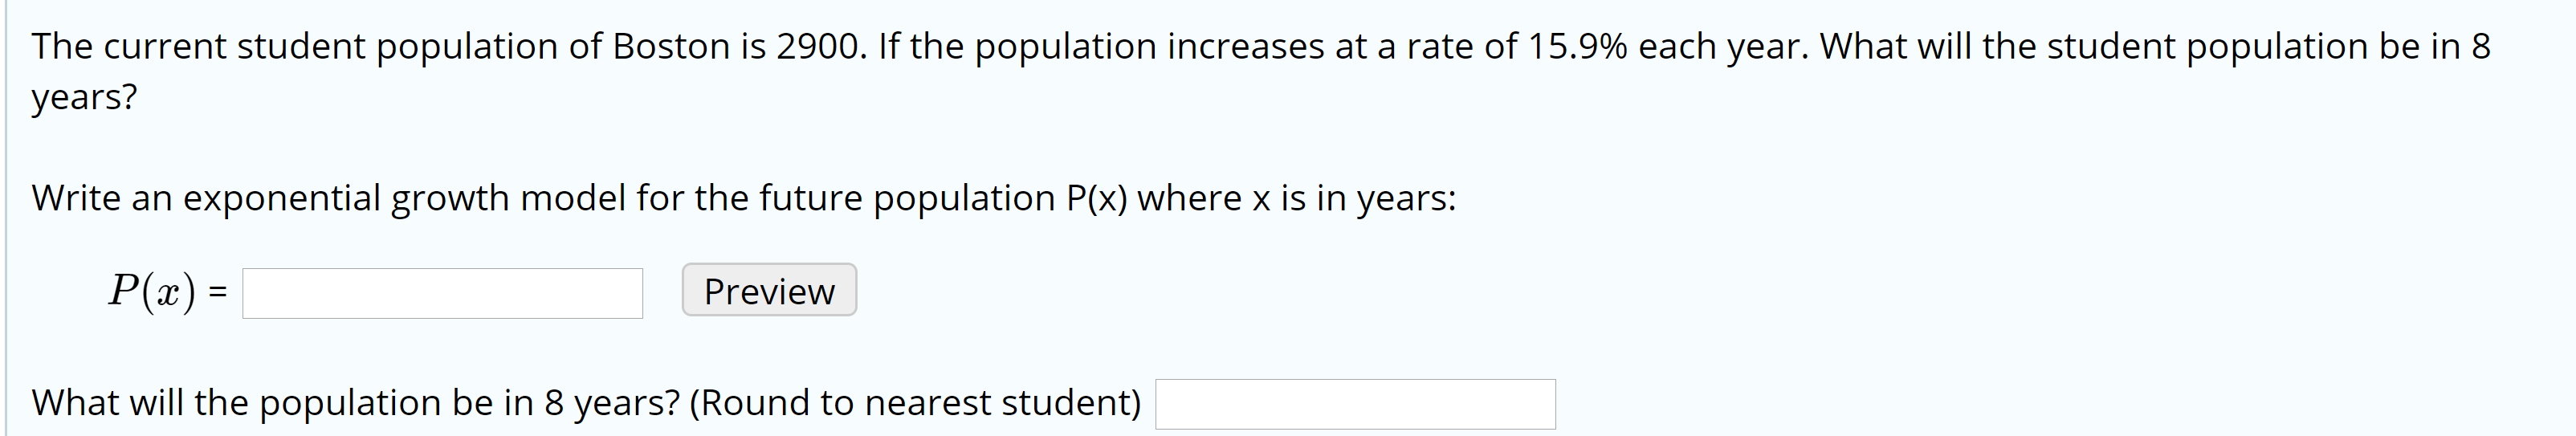 The current student population of Boston is 2900. If the population increases at a rate of 15.9% each year. What will the student population be in 8
years?
Write an exponential growth model for the future population P(x) where x is in years:
P(x) =
Preview
What will the population be in 8 years? (Round to nearest student)
